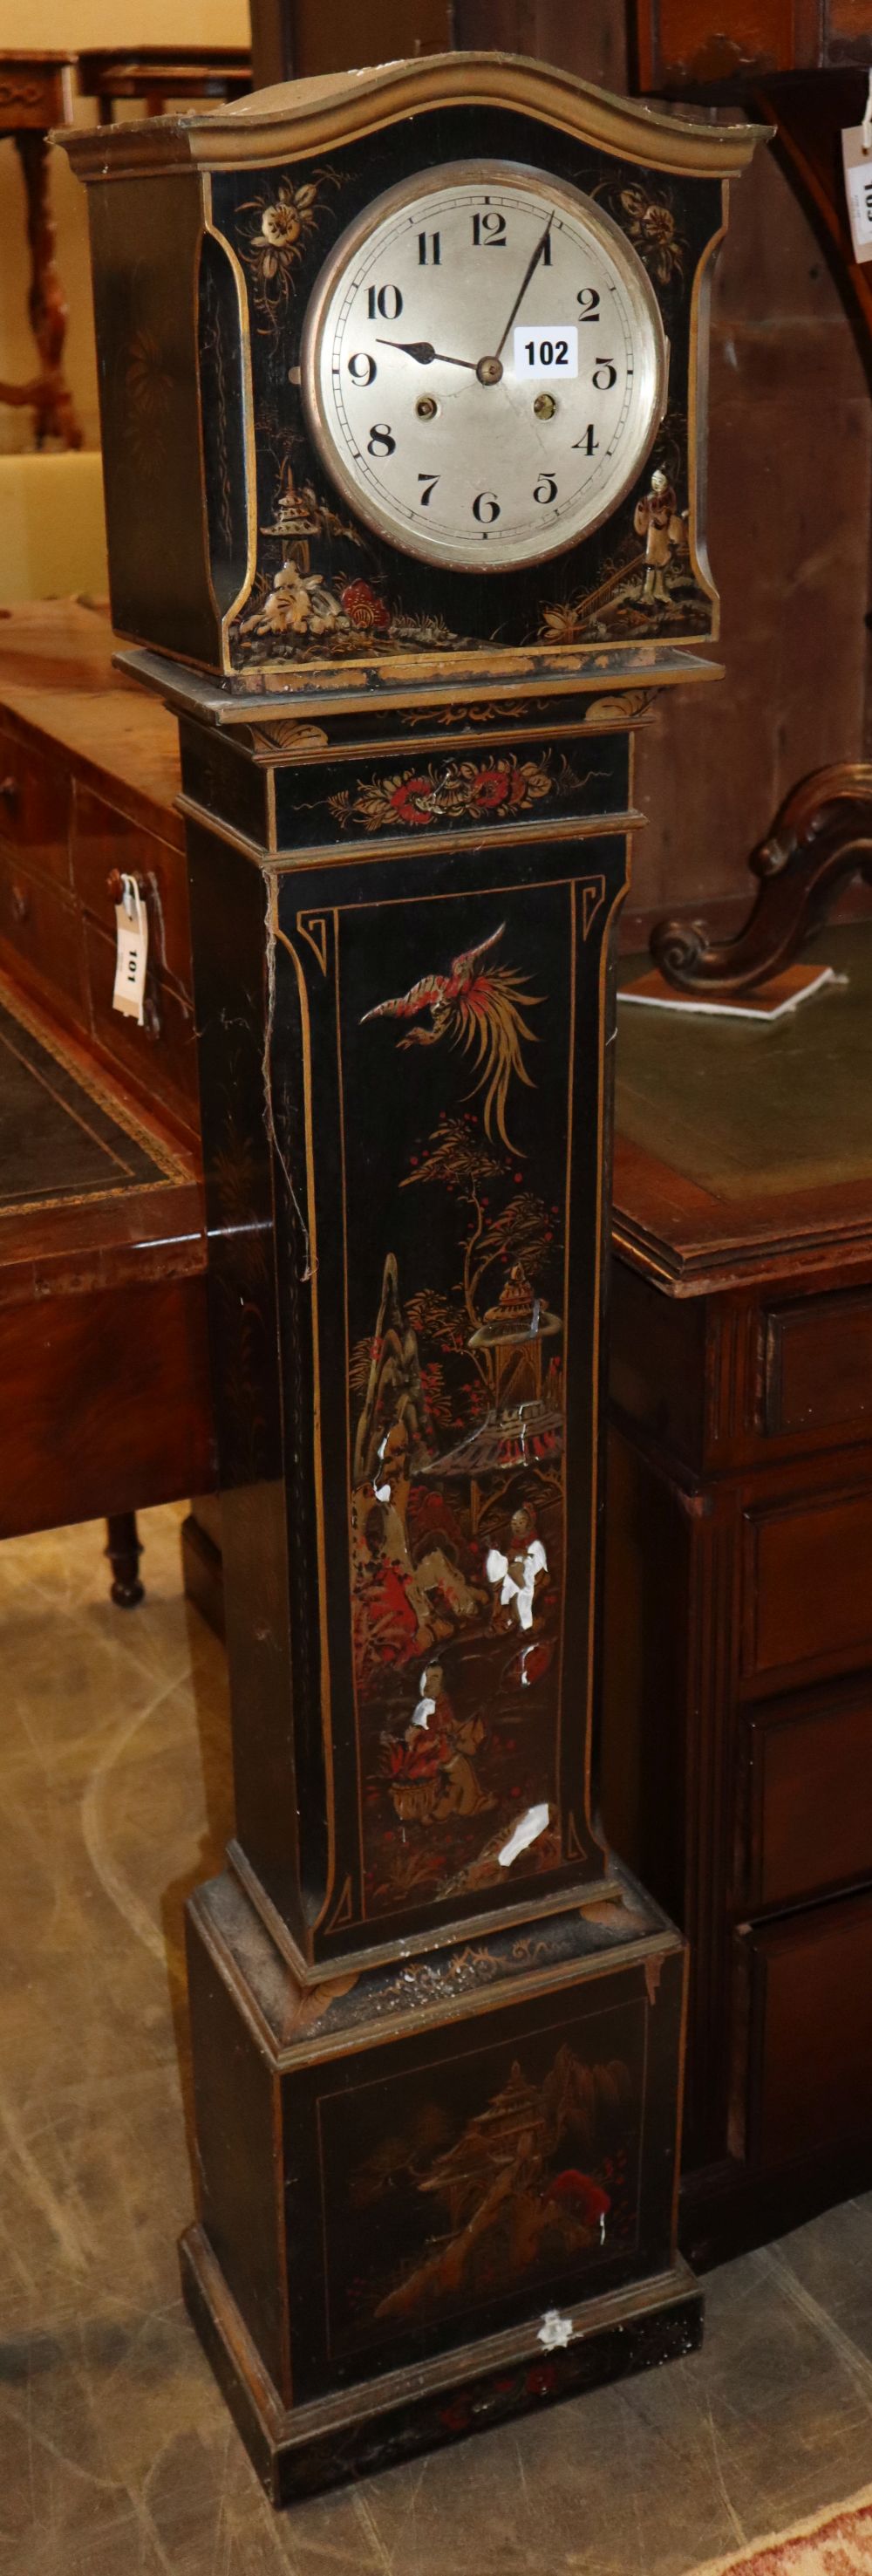 An early 20th century chinoiserie lacquered grandmother clock, H.136cmCONDITION: Overall in very